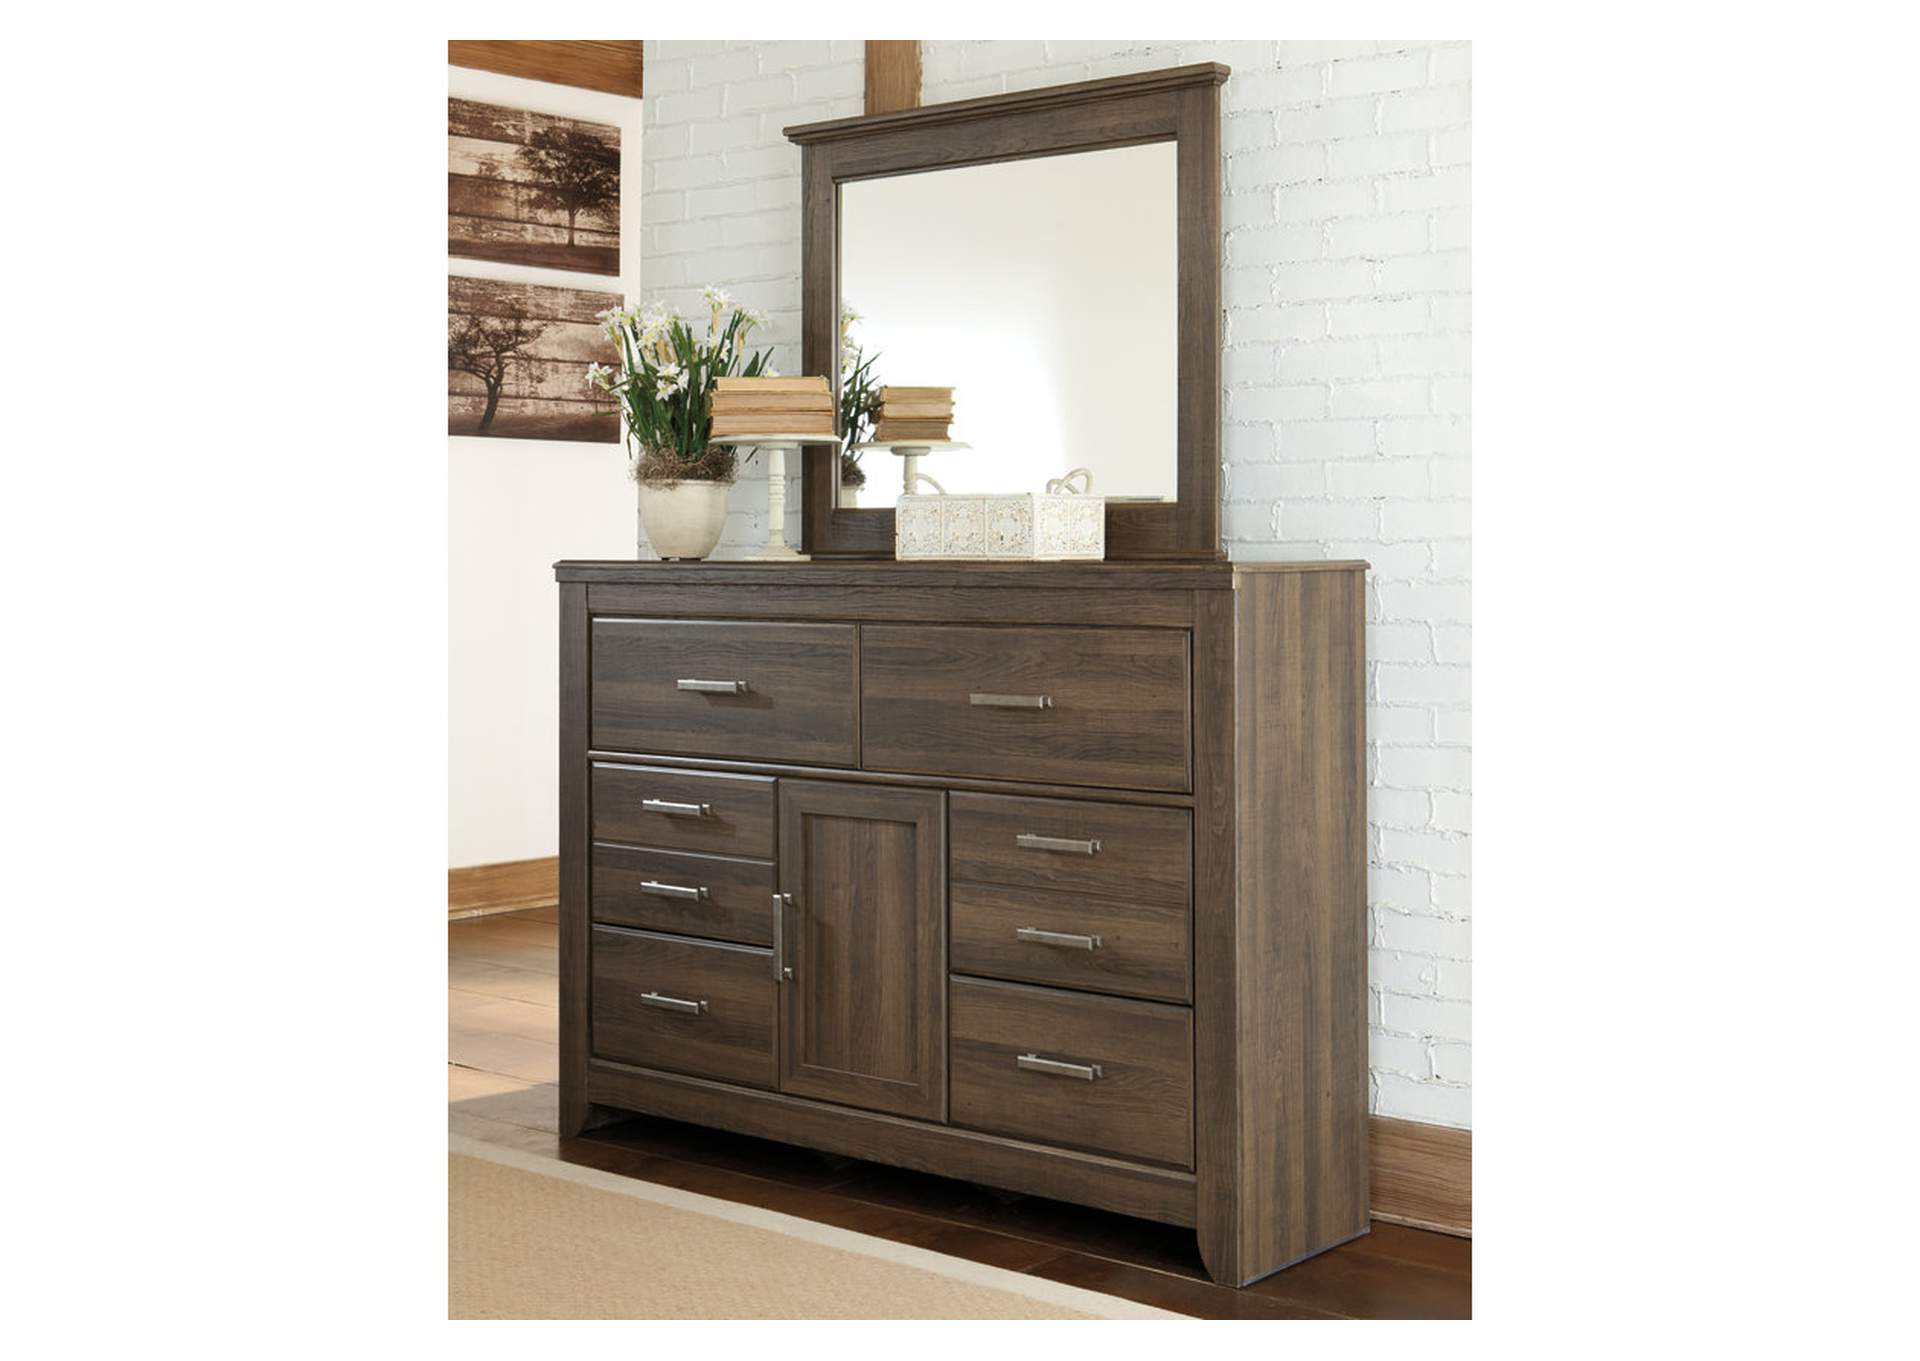 Juararo King Poster Bed with Mirrored Dresser and Chest,Signature Design By Ashley